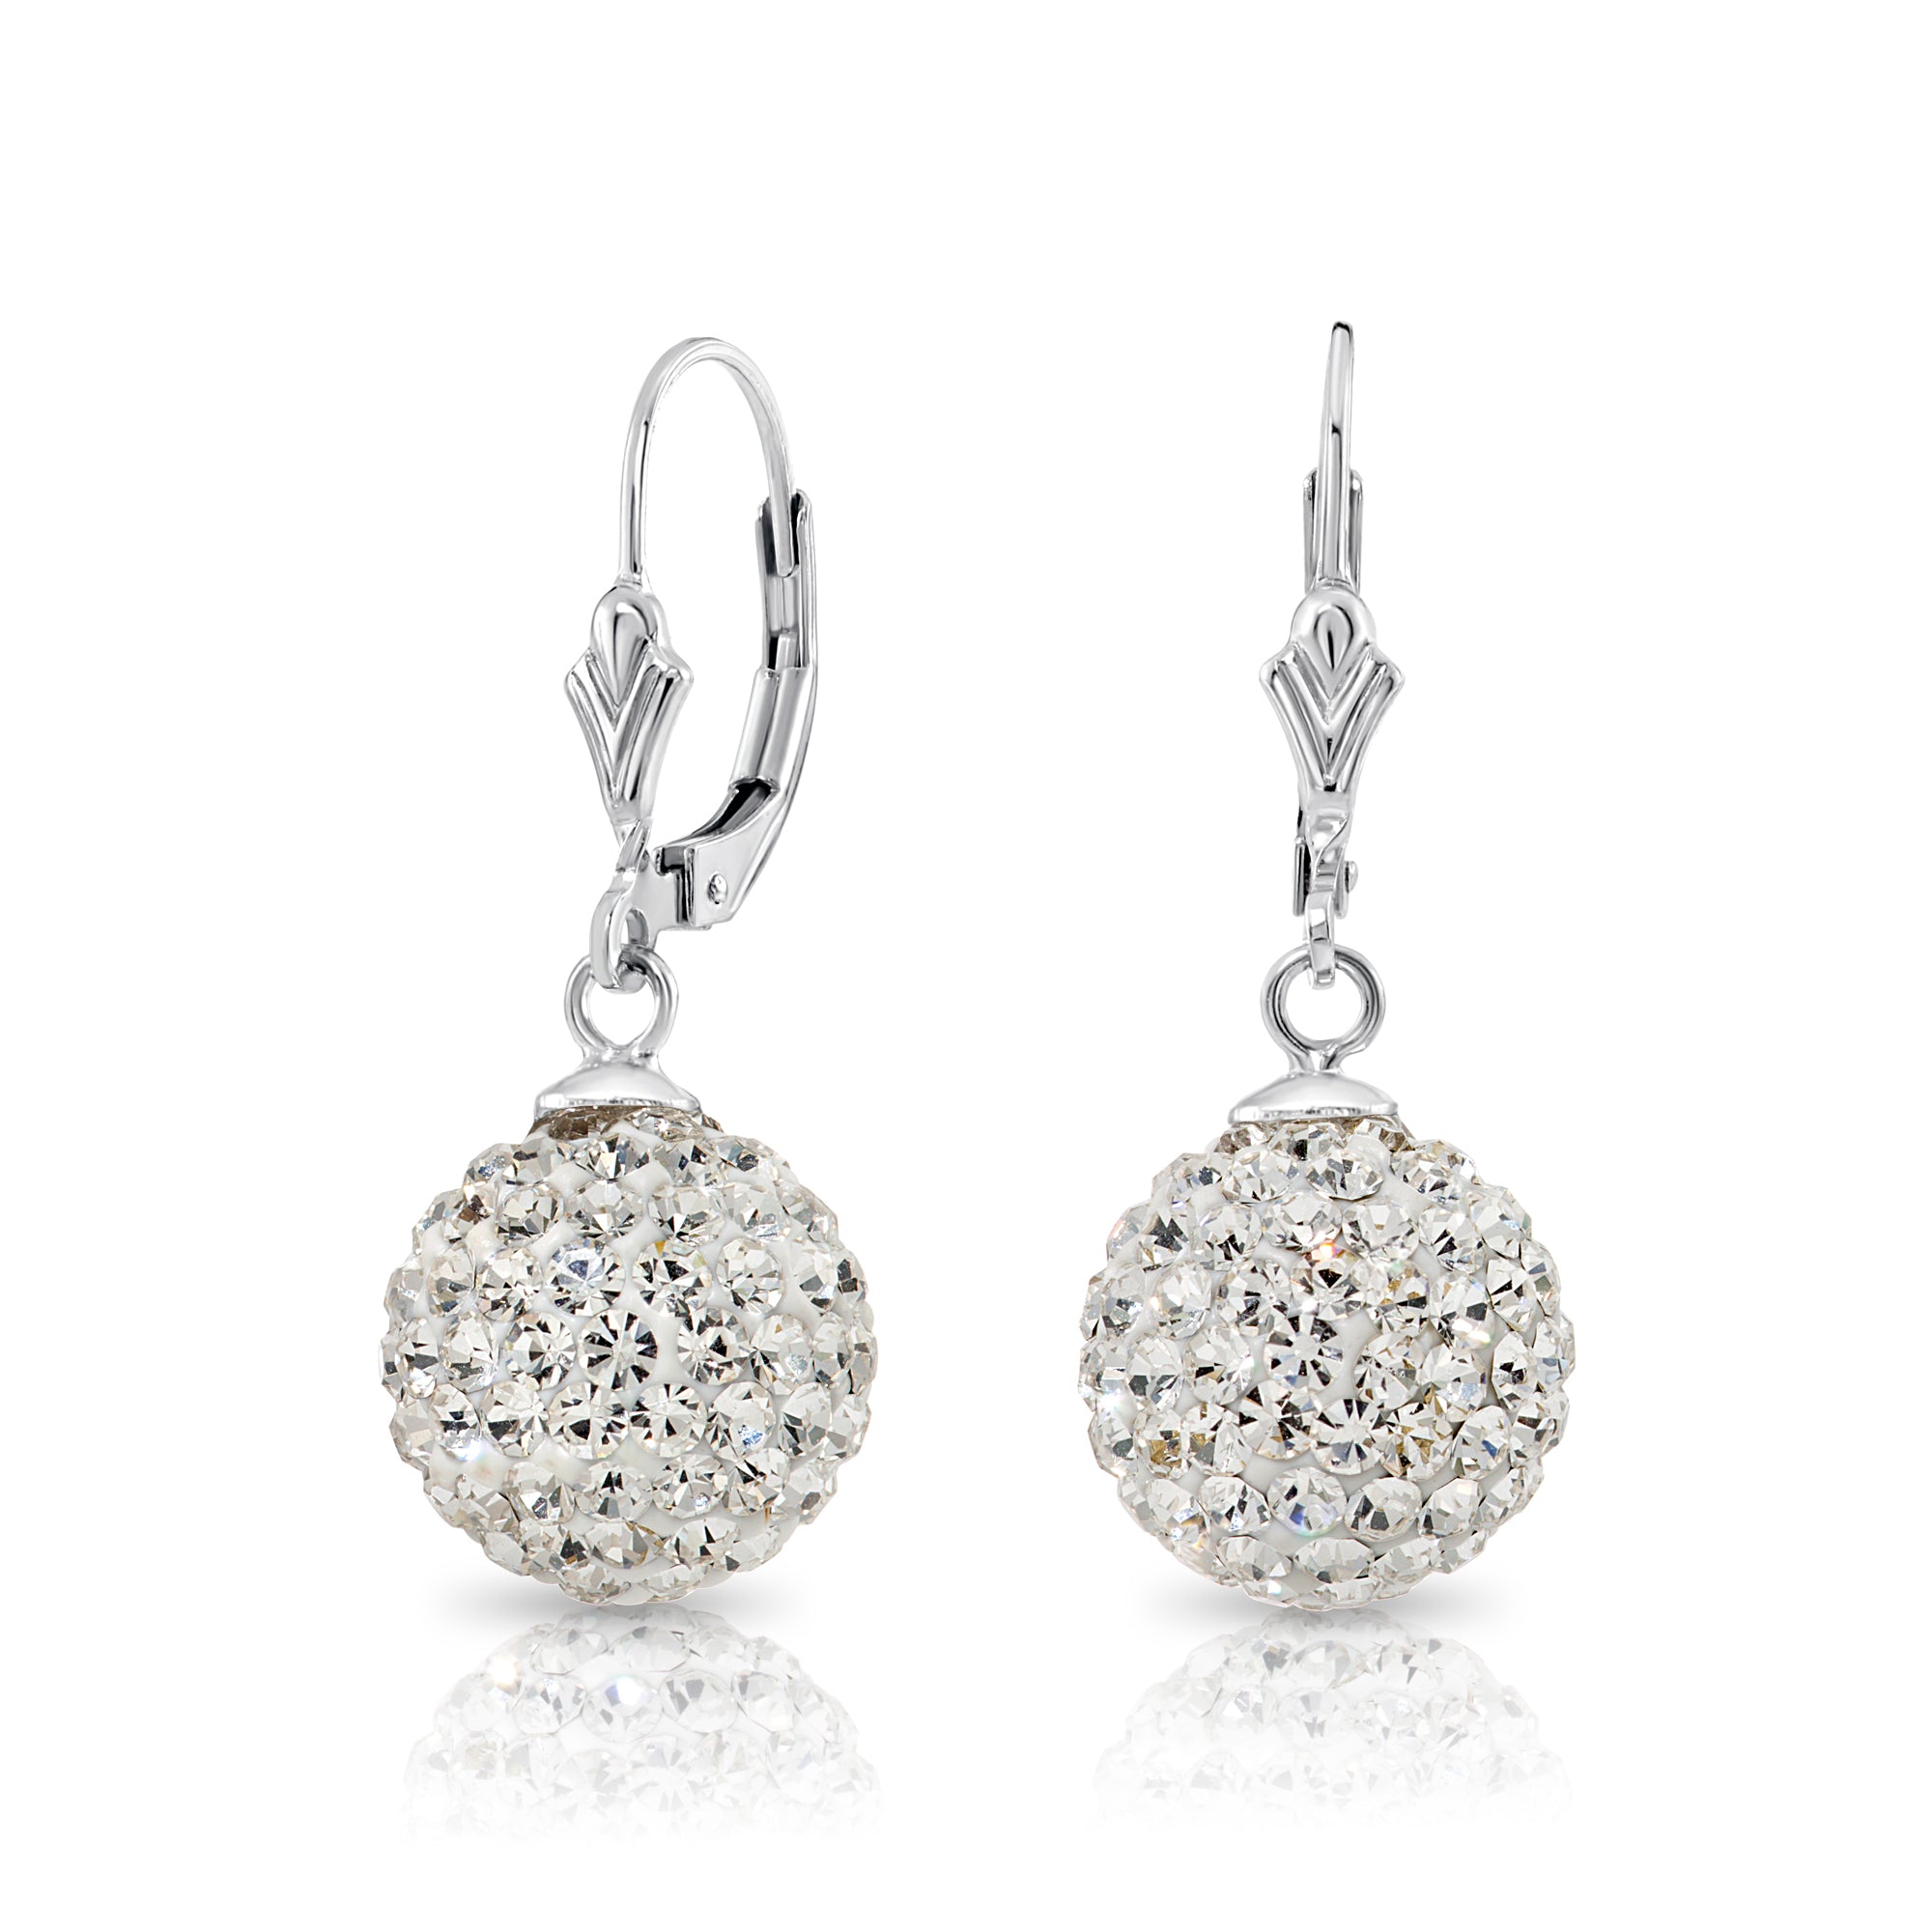 CZ Crystal Ball French-back Earrings in 12mm